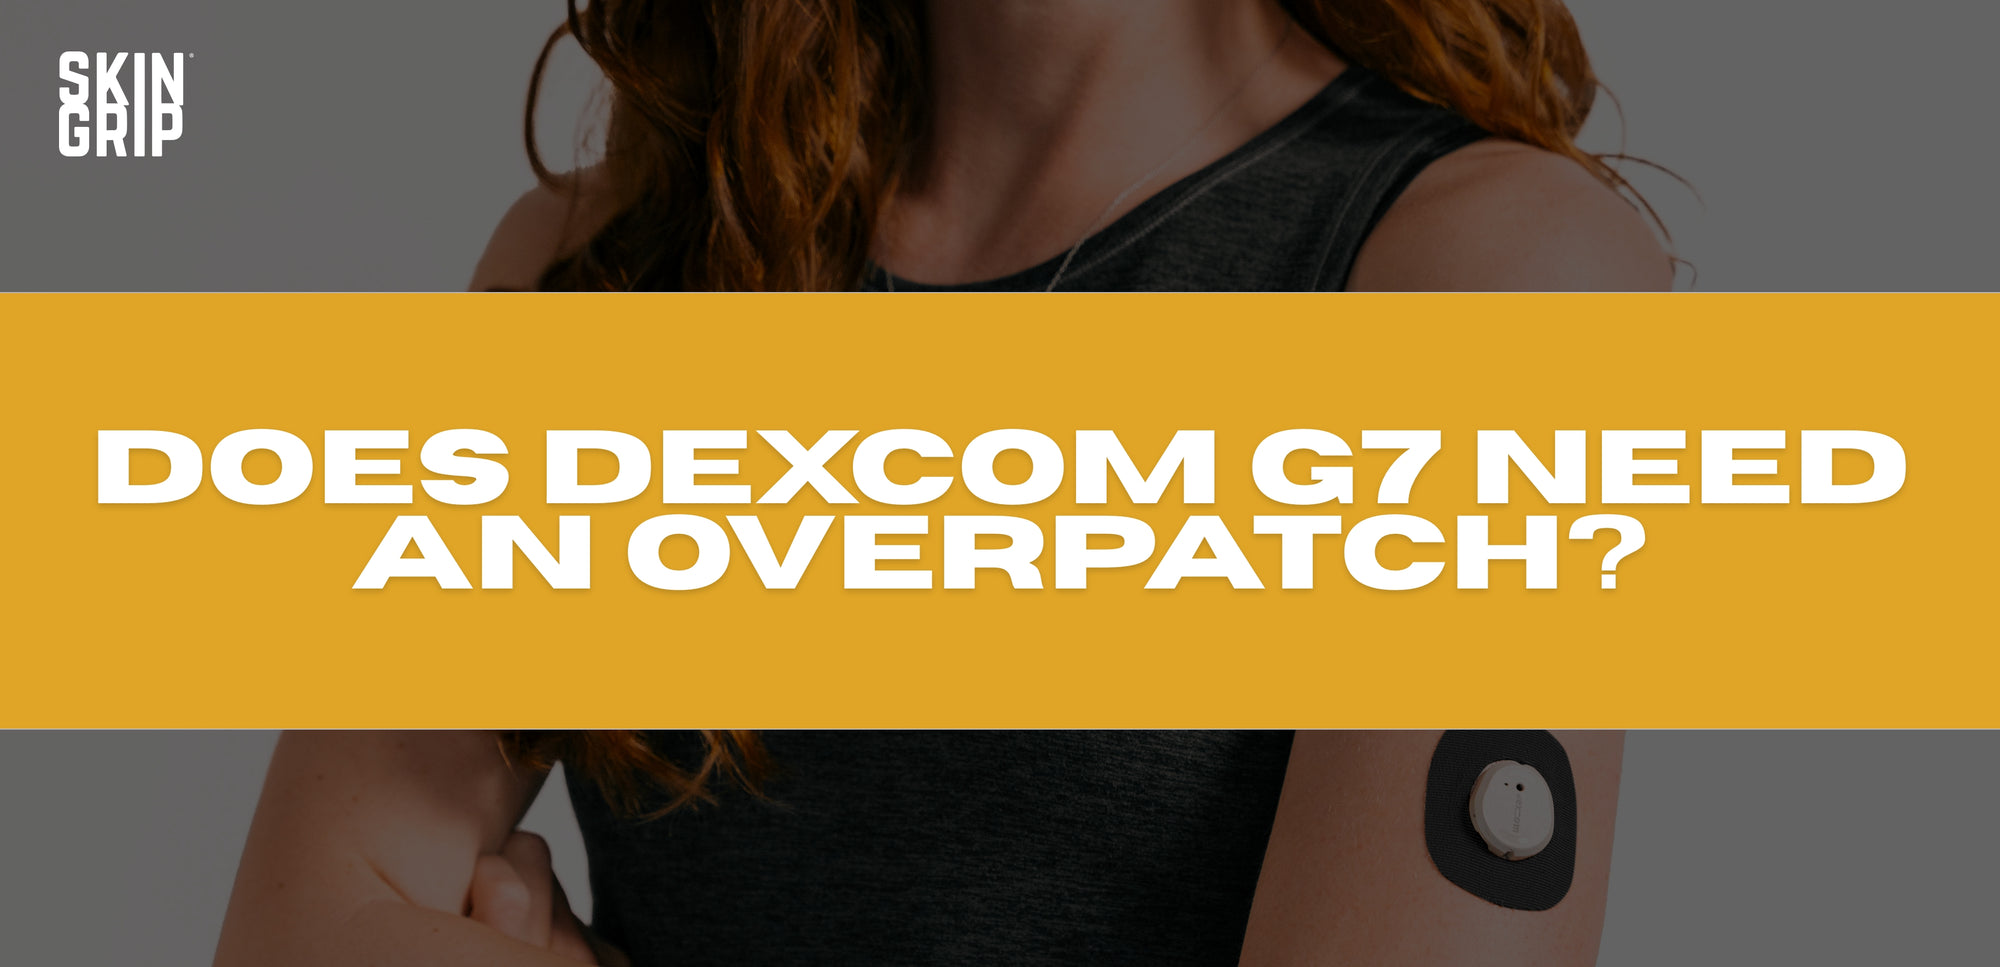 Does Dexcom G7 Need an Overpatch?